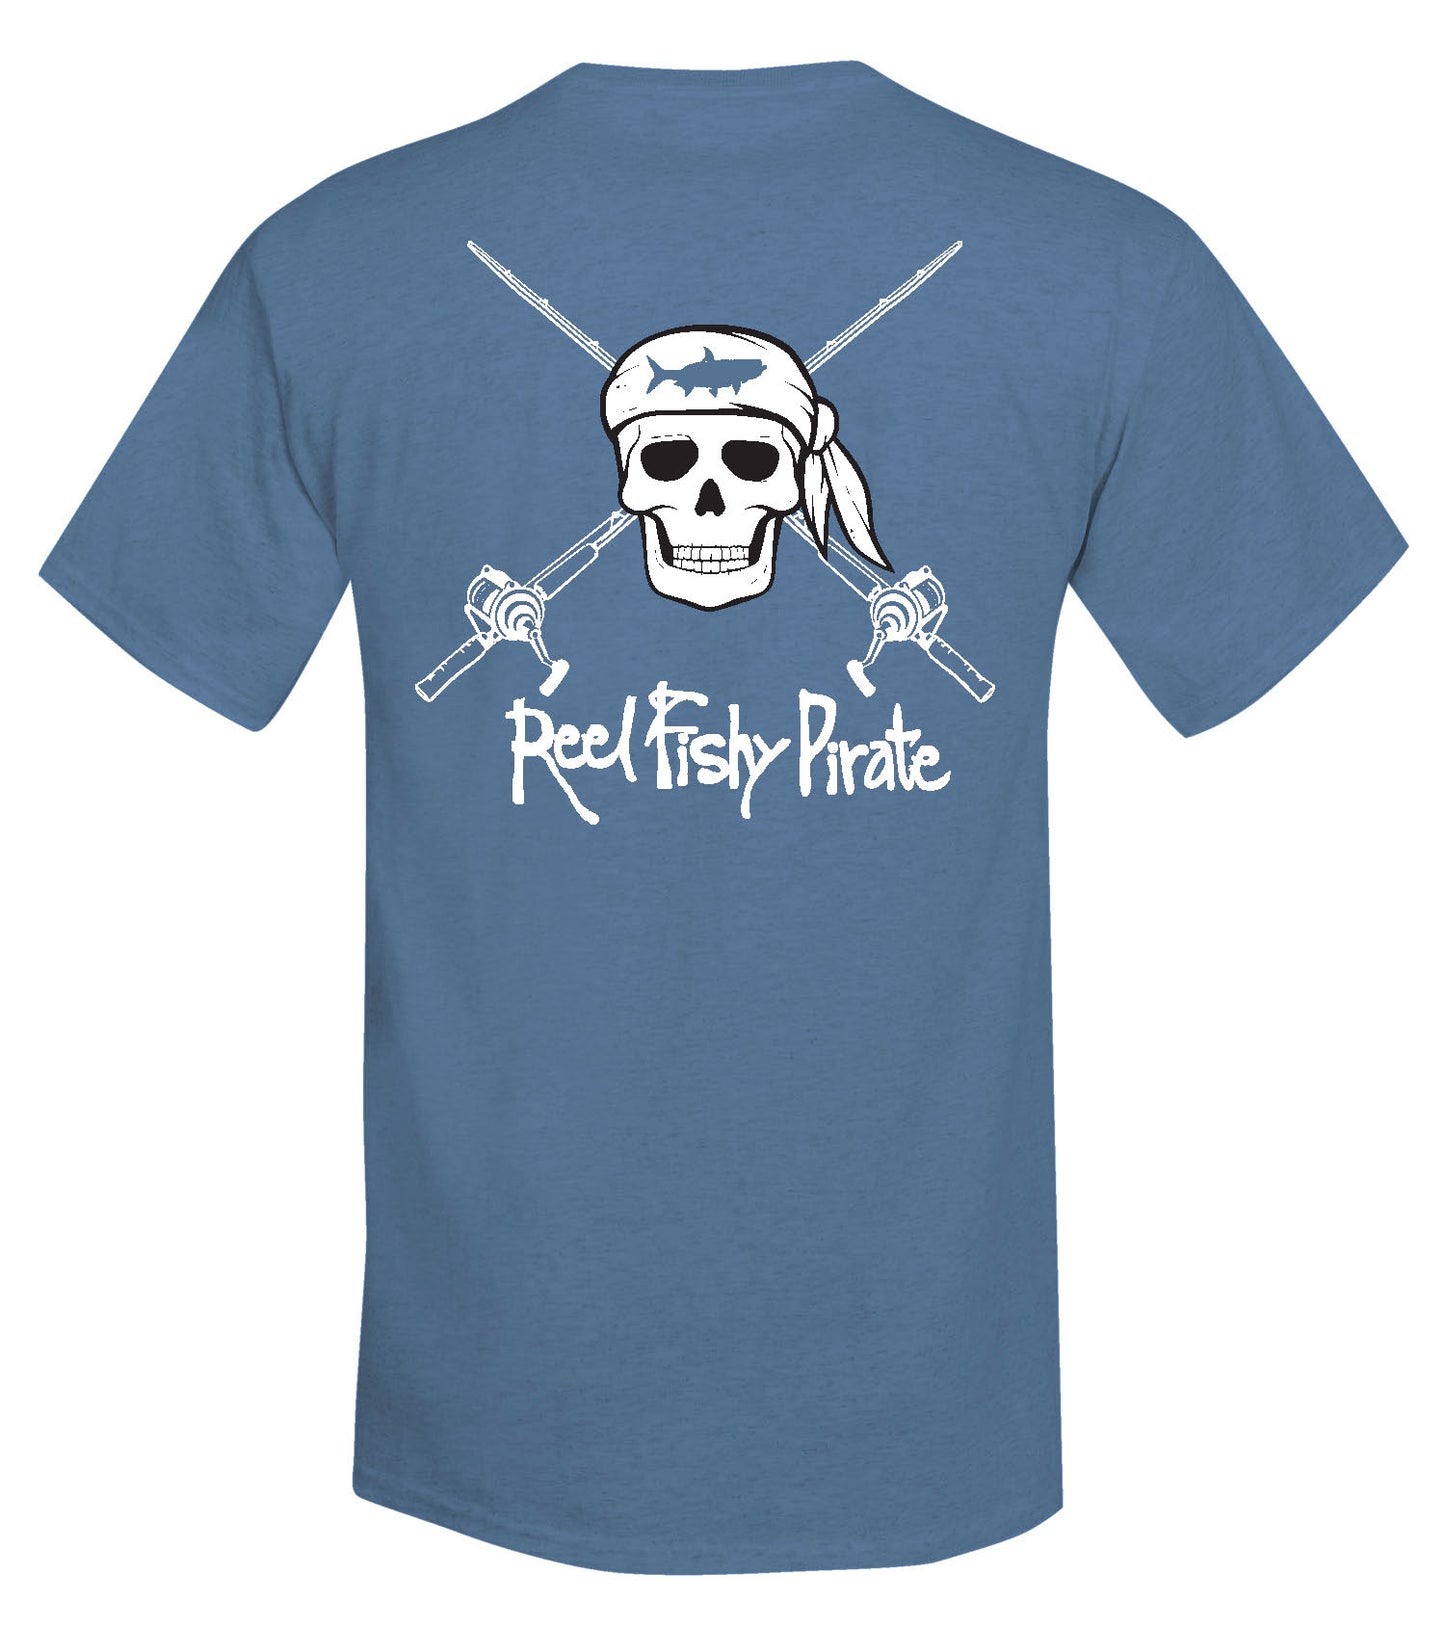 Youth Reel Fishy Pirate Skull & Rods t-shirt - Heather Blue